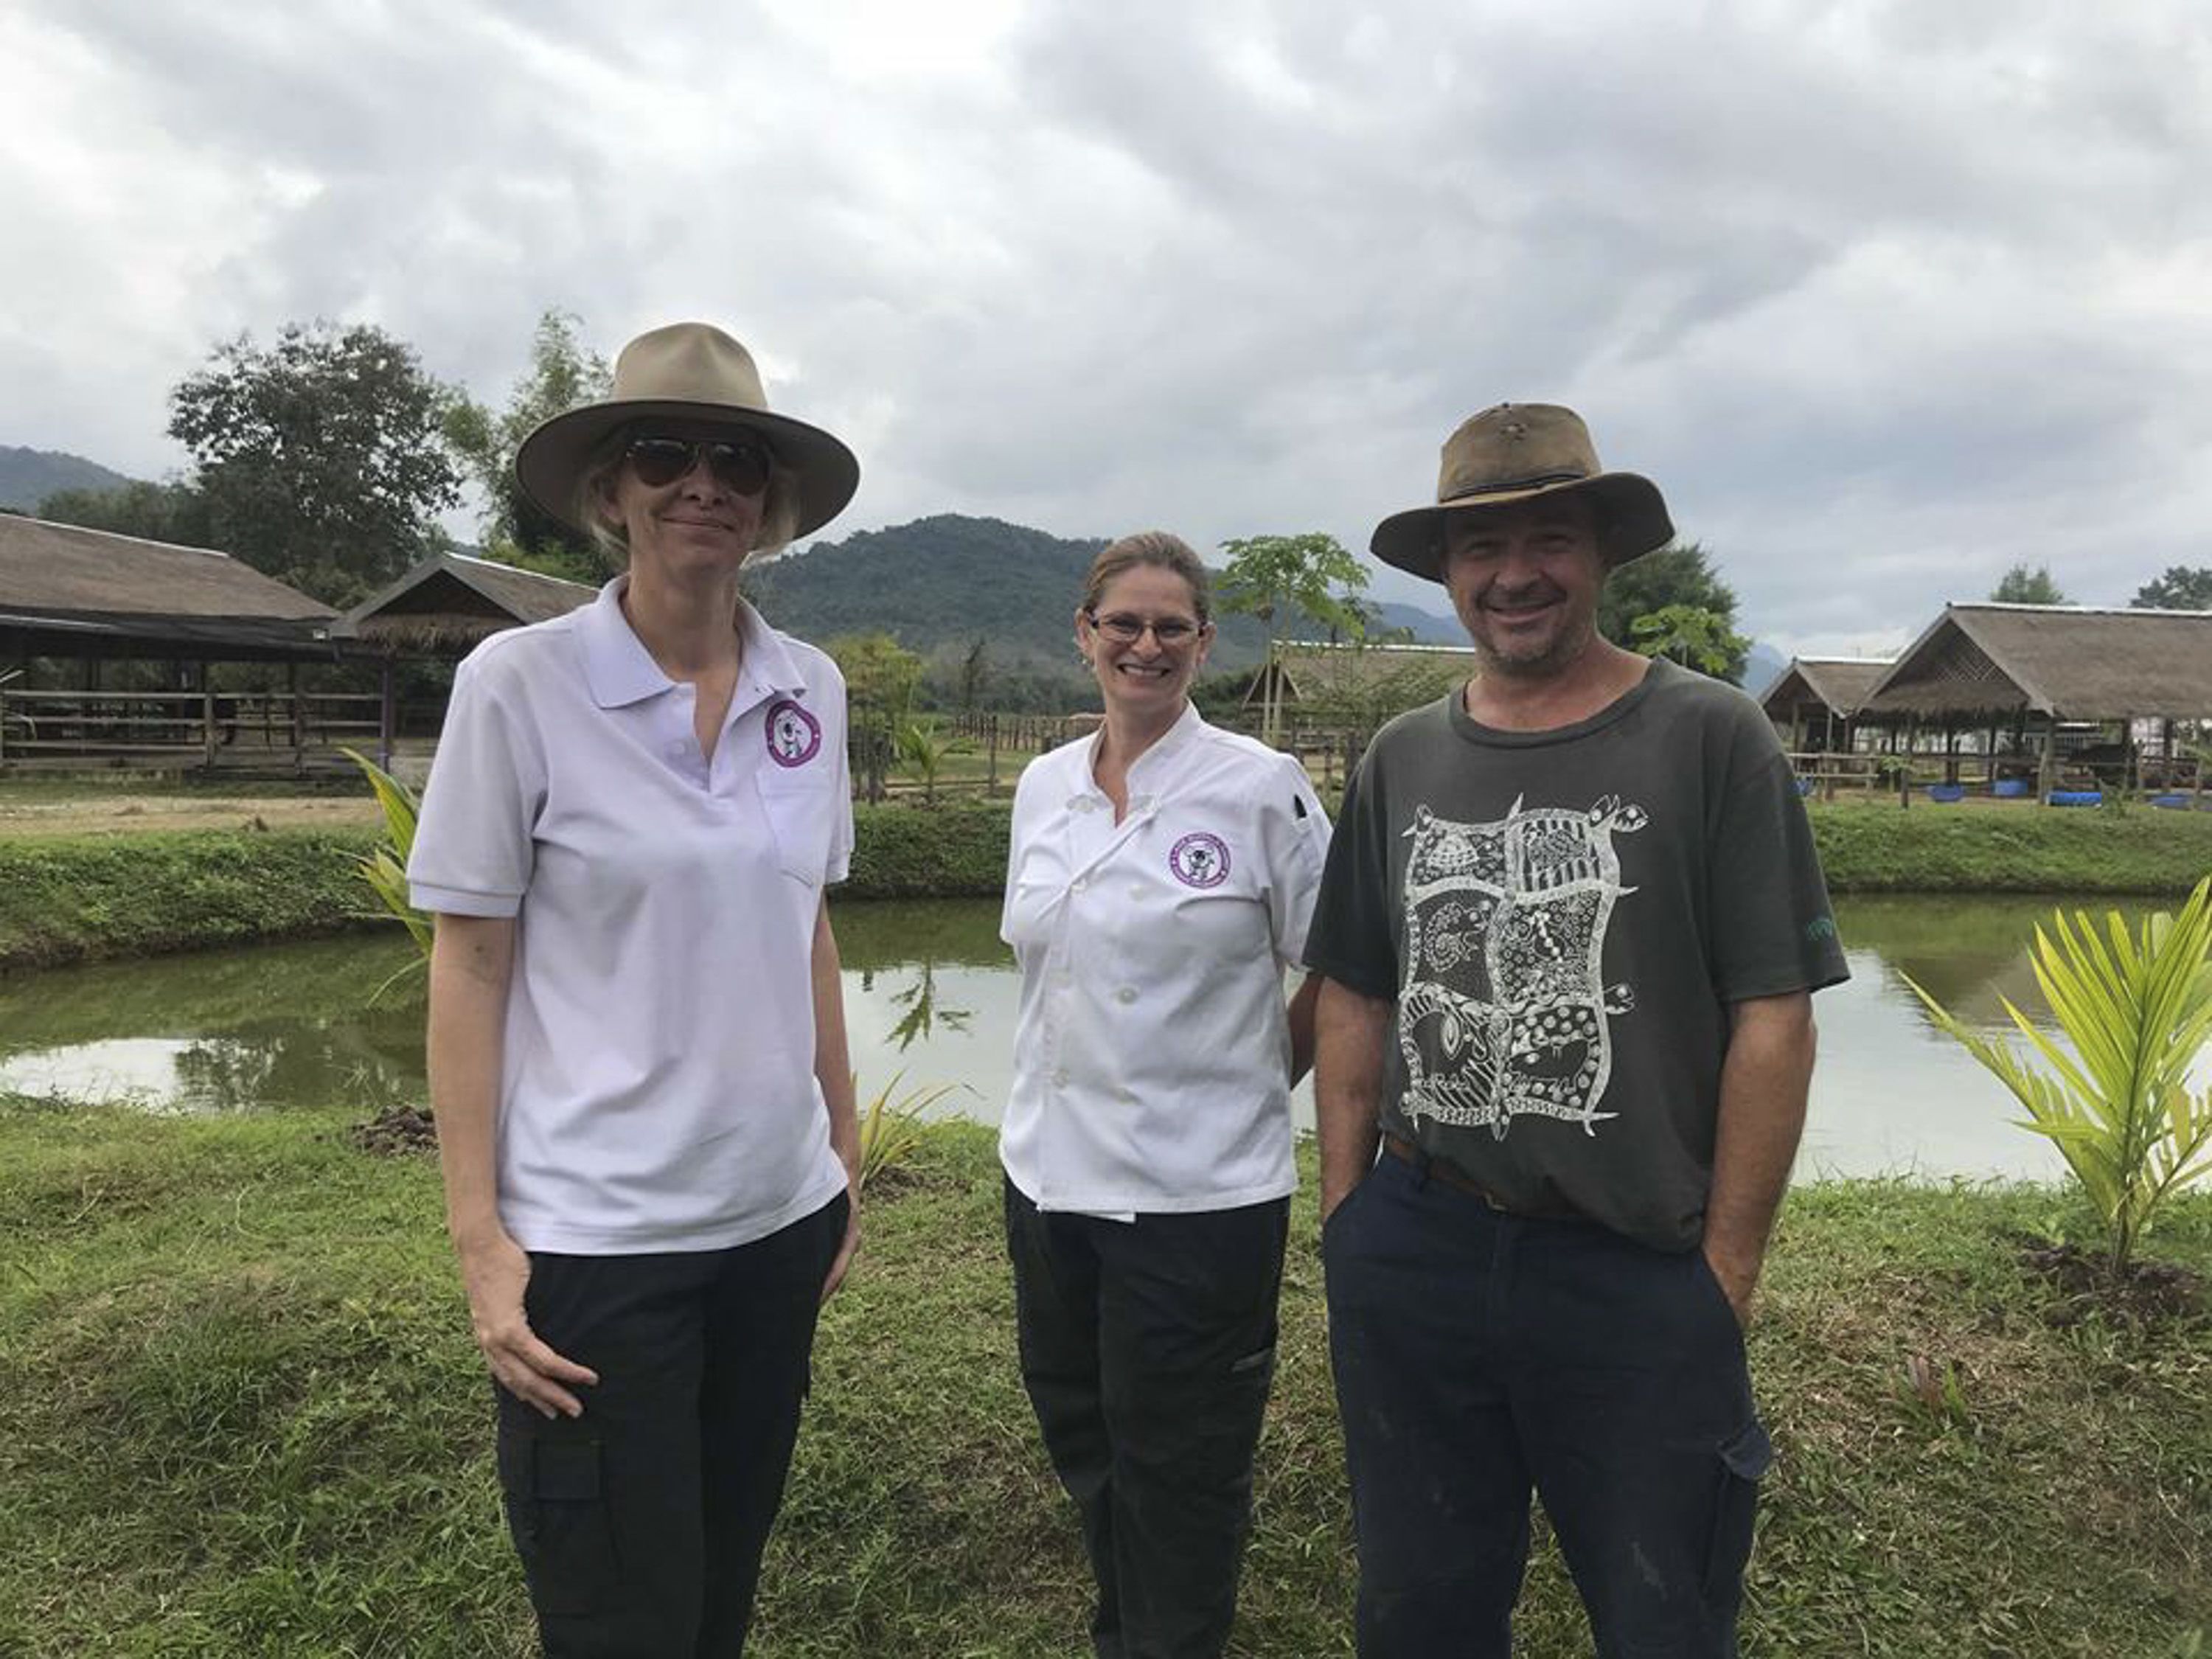 Meet the Laos Buffalo Dairy founders: CEO Susie Martin, Farm GM Steven McWhirter and Rachel O'Shea, executive chef and GM of production.